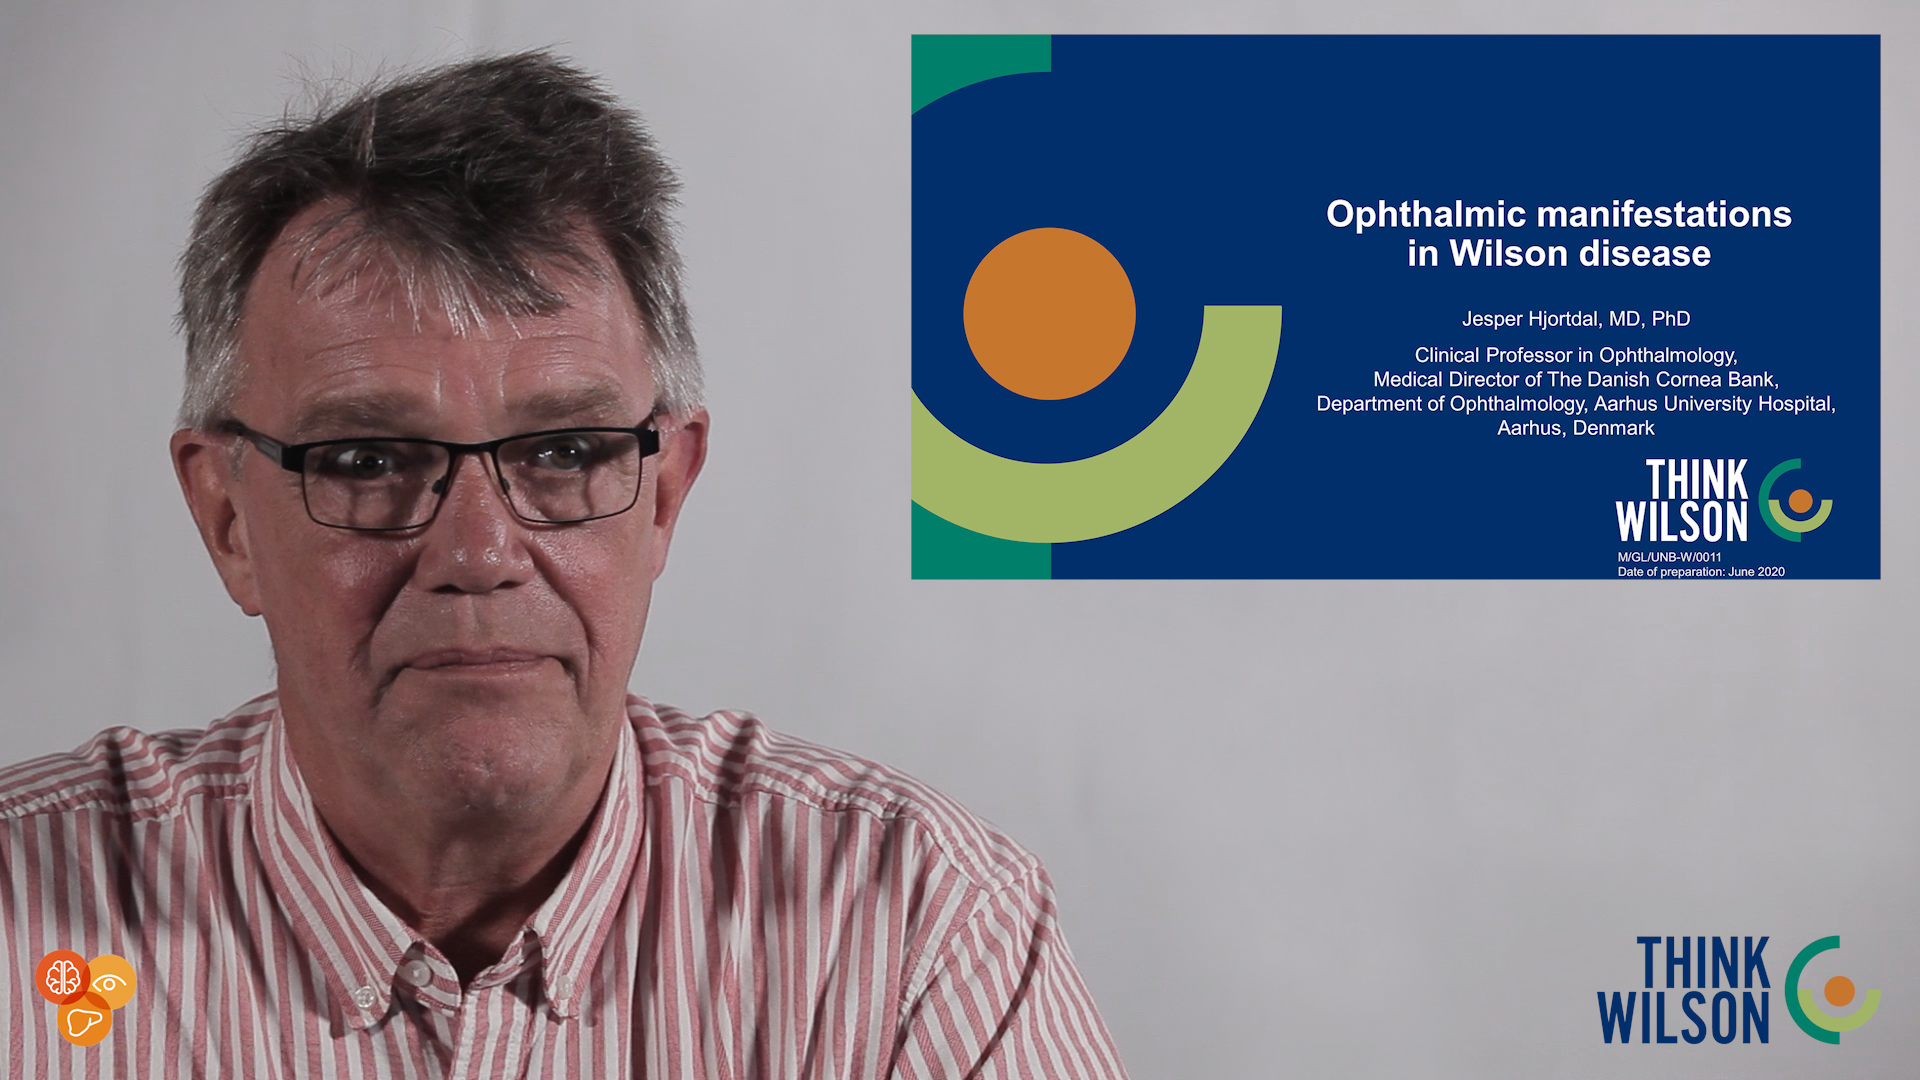 Jesper Hjortdal, MD, PhD. Clinical Professor in Ophthalmology. Medical Director of the Danish Cornea Bank, Department of Ophthalmology, Aarhus University Hospital, Aarhus, Denmark. Explains the ophthalmic manifestations of Wilson's disease.